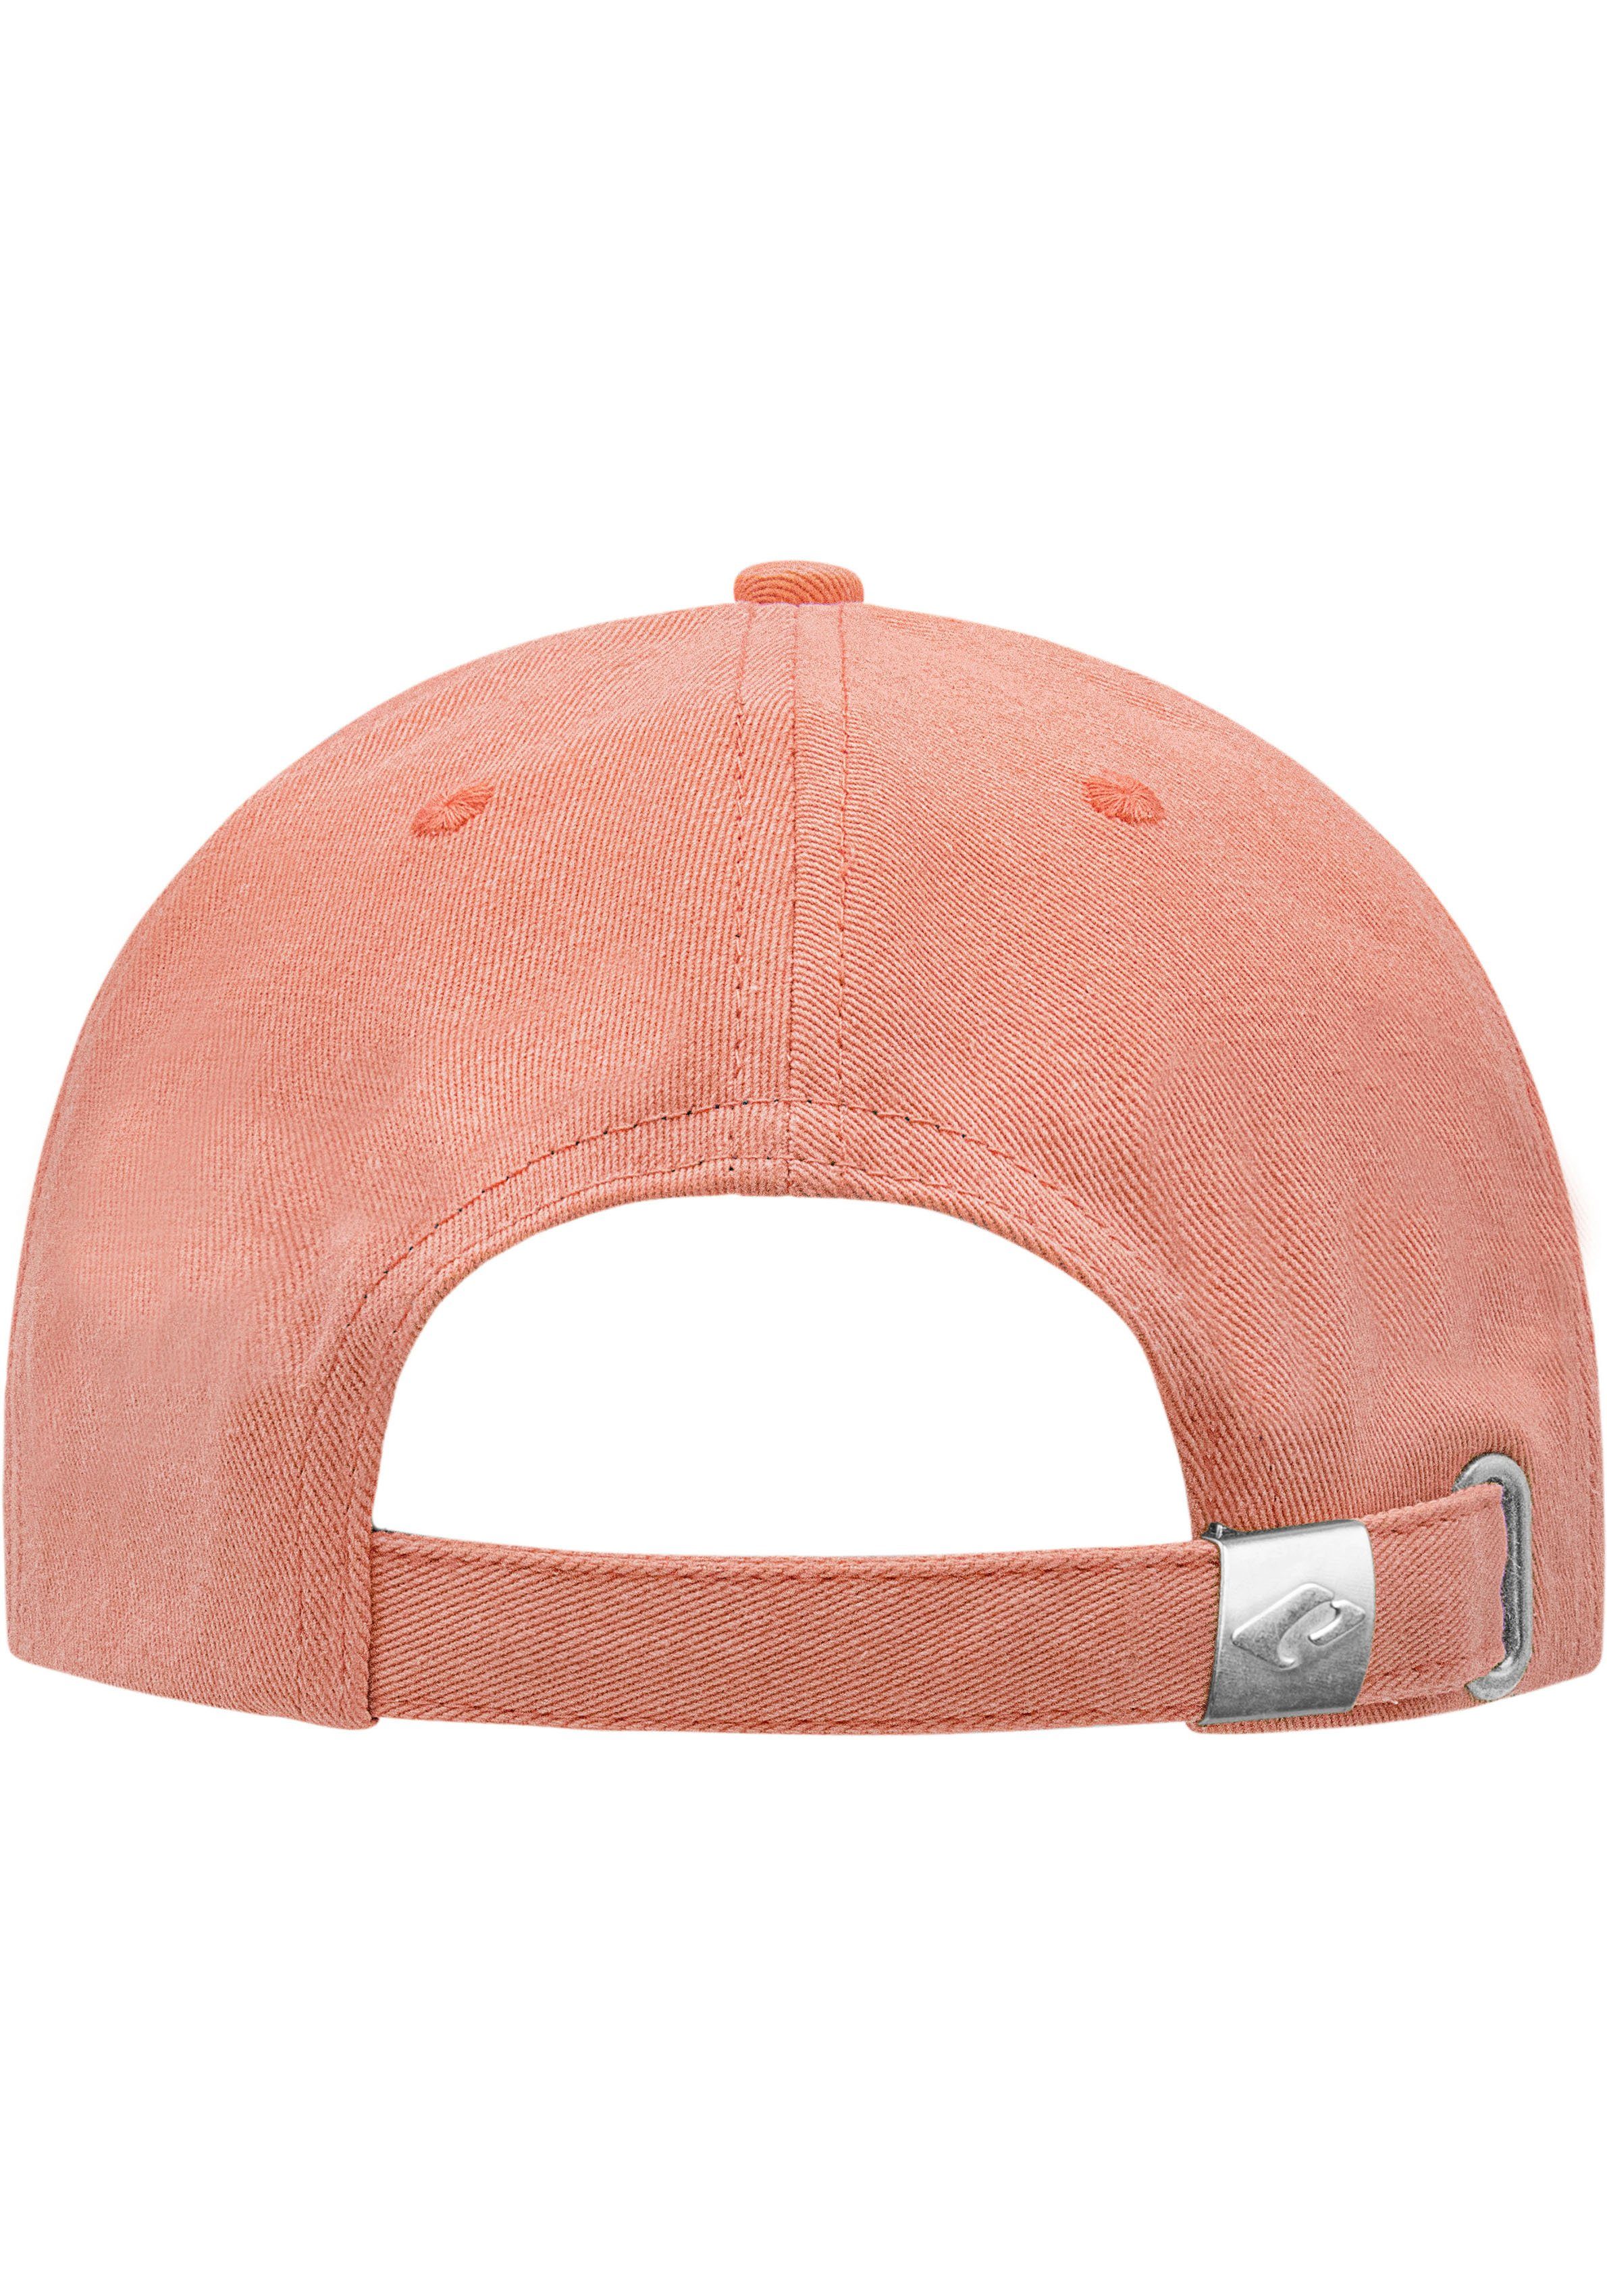 chillouts Baseball coral Hat Cap Arklow